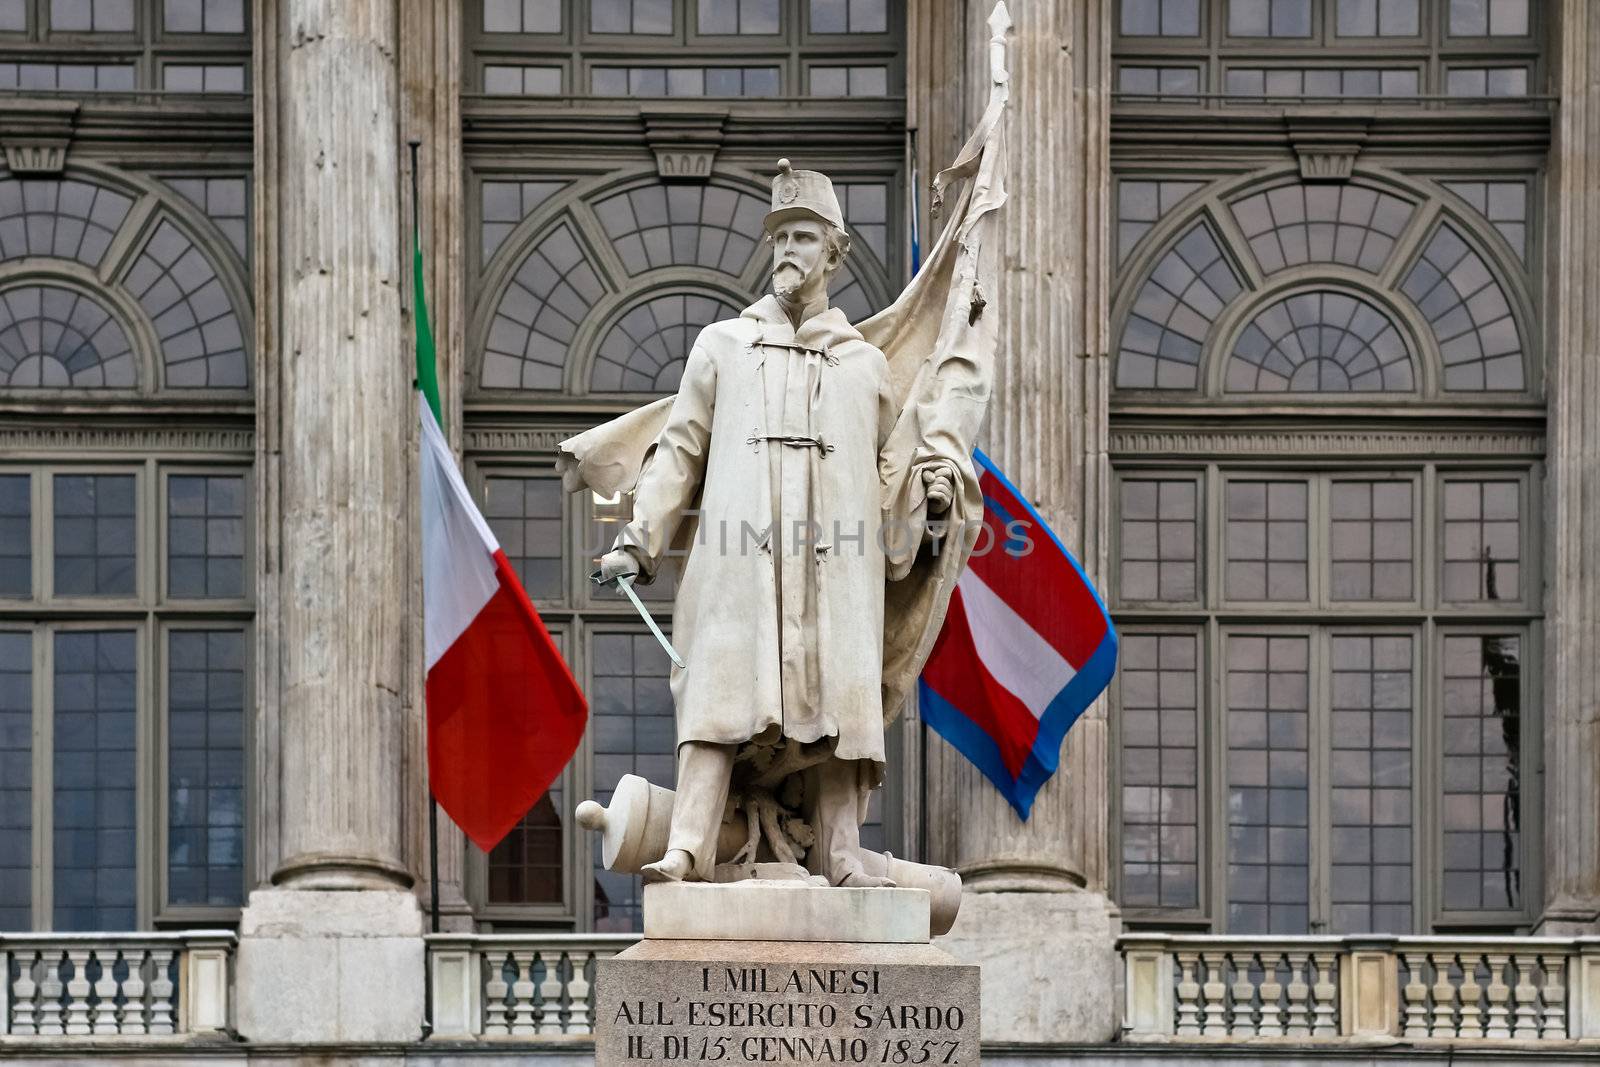 A monument for the sardinian against the milan army